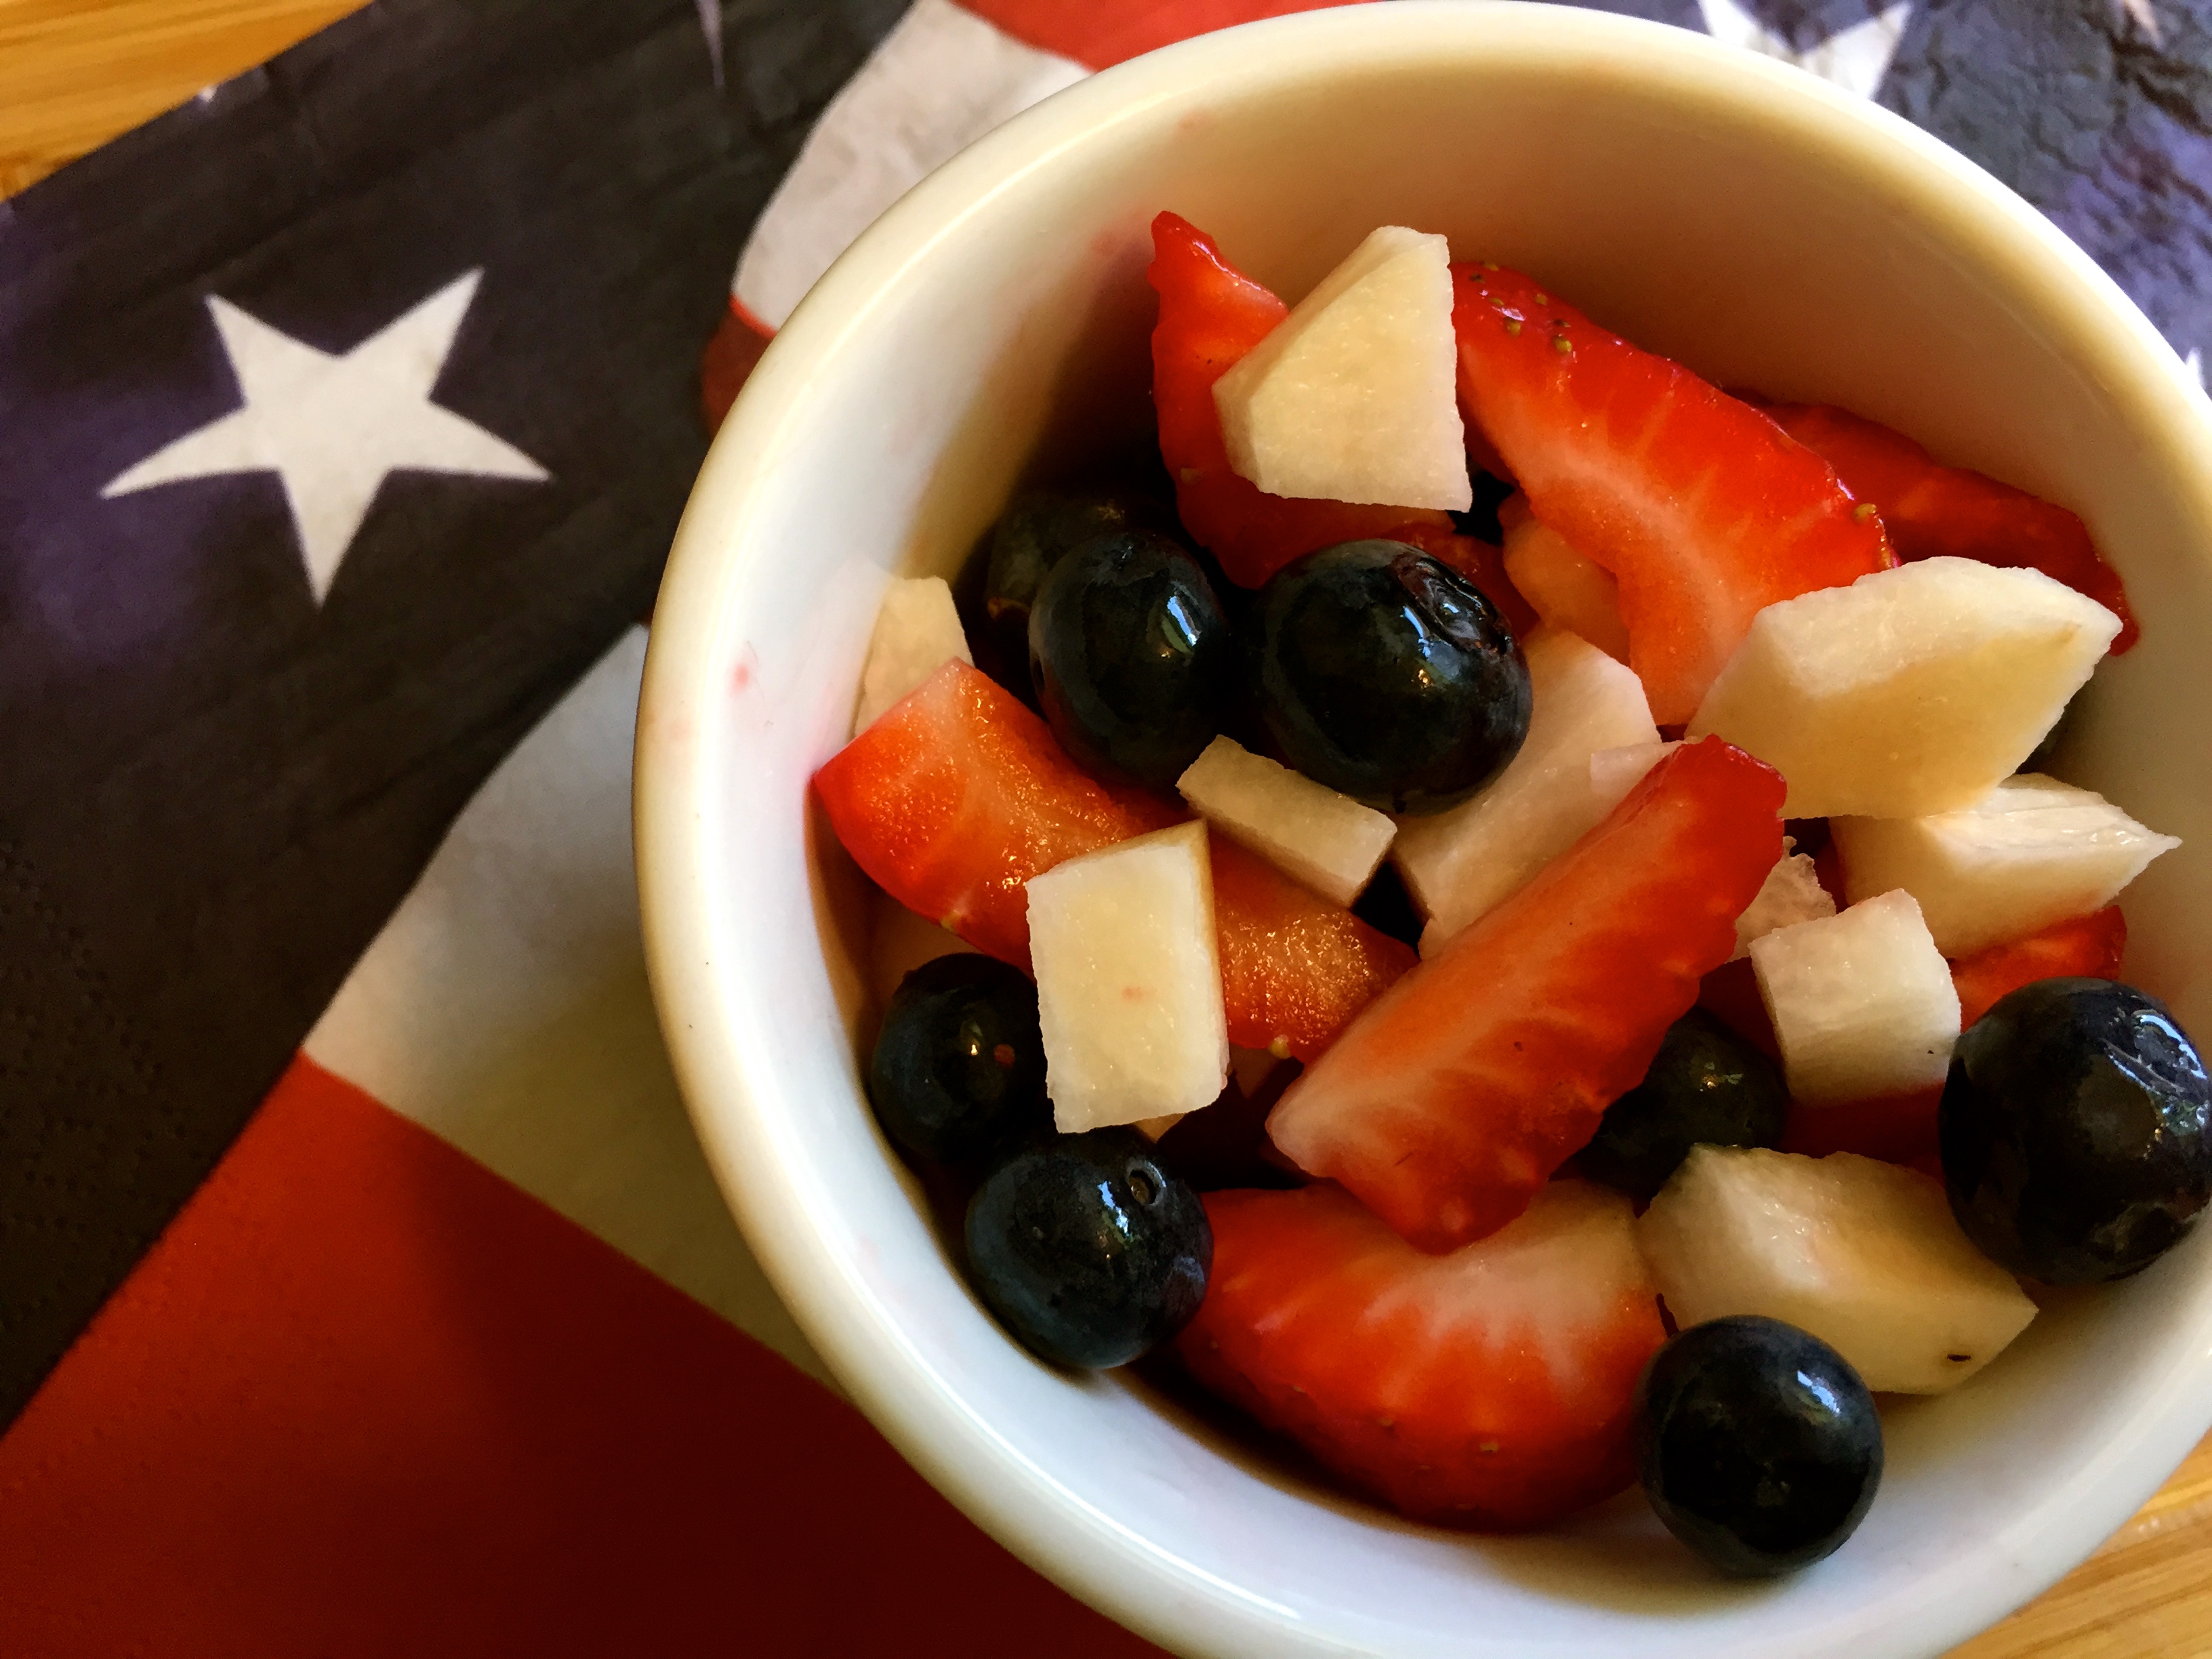 Red, White and Blue Fruit Salad